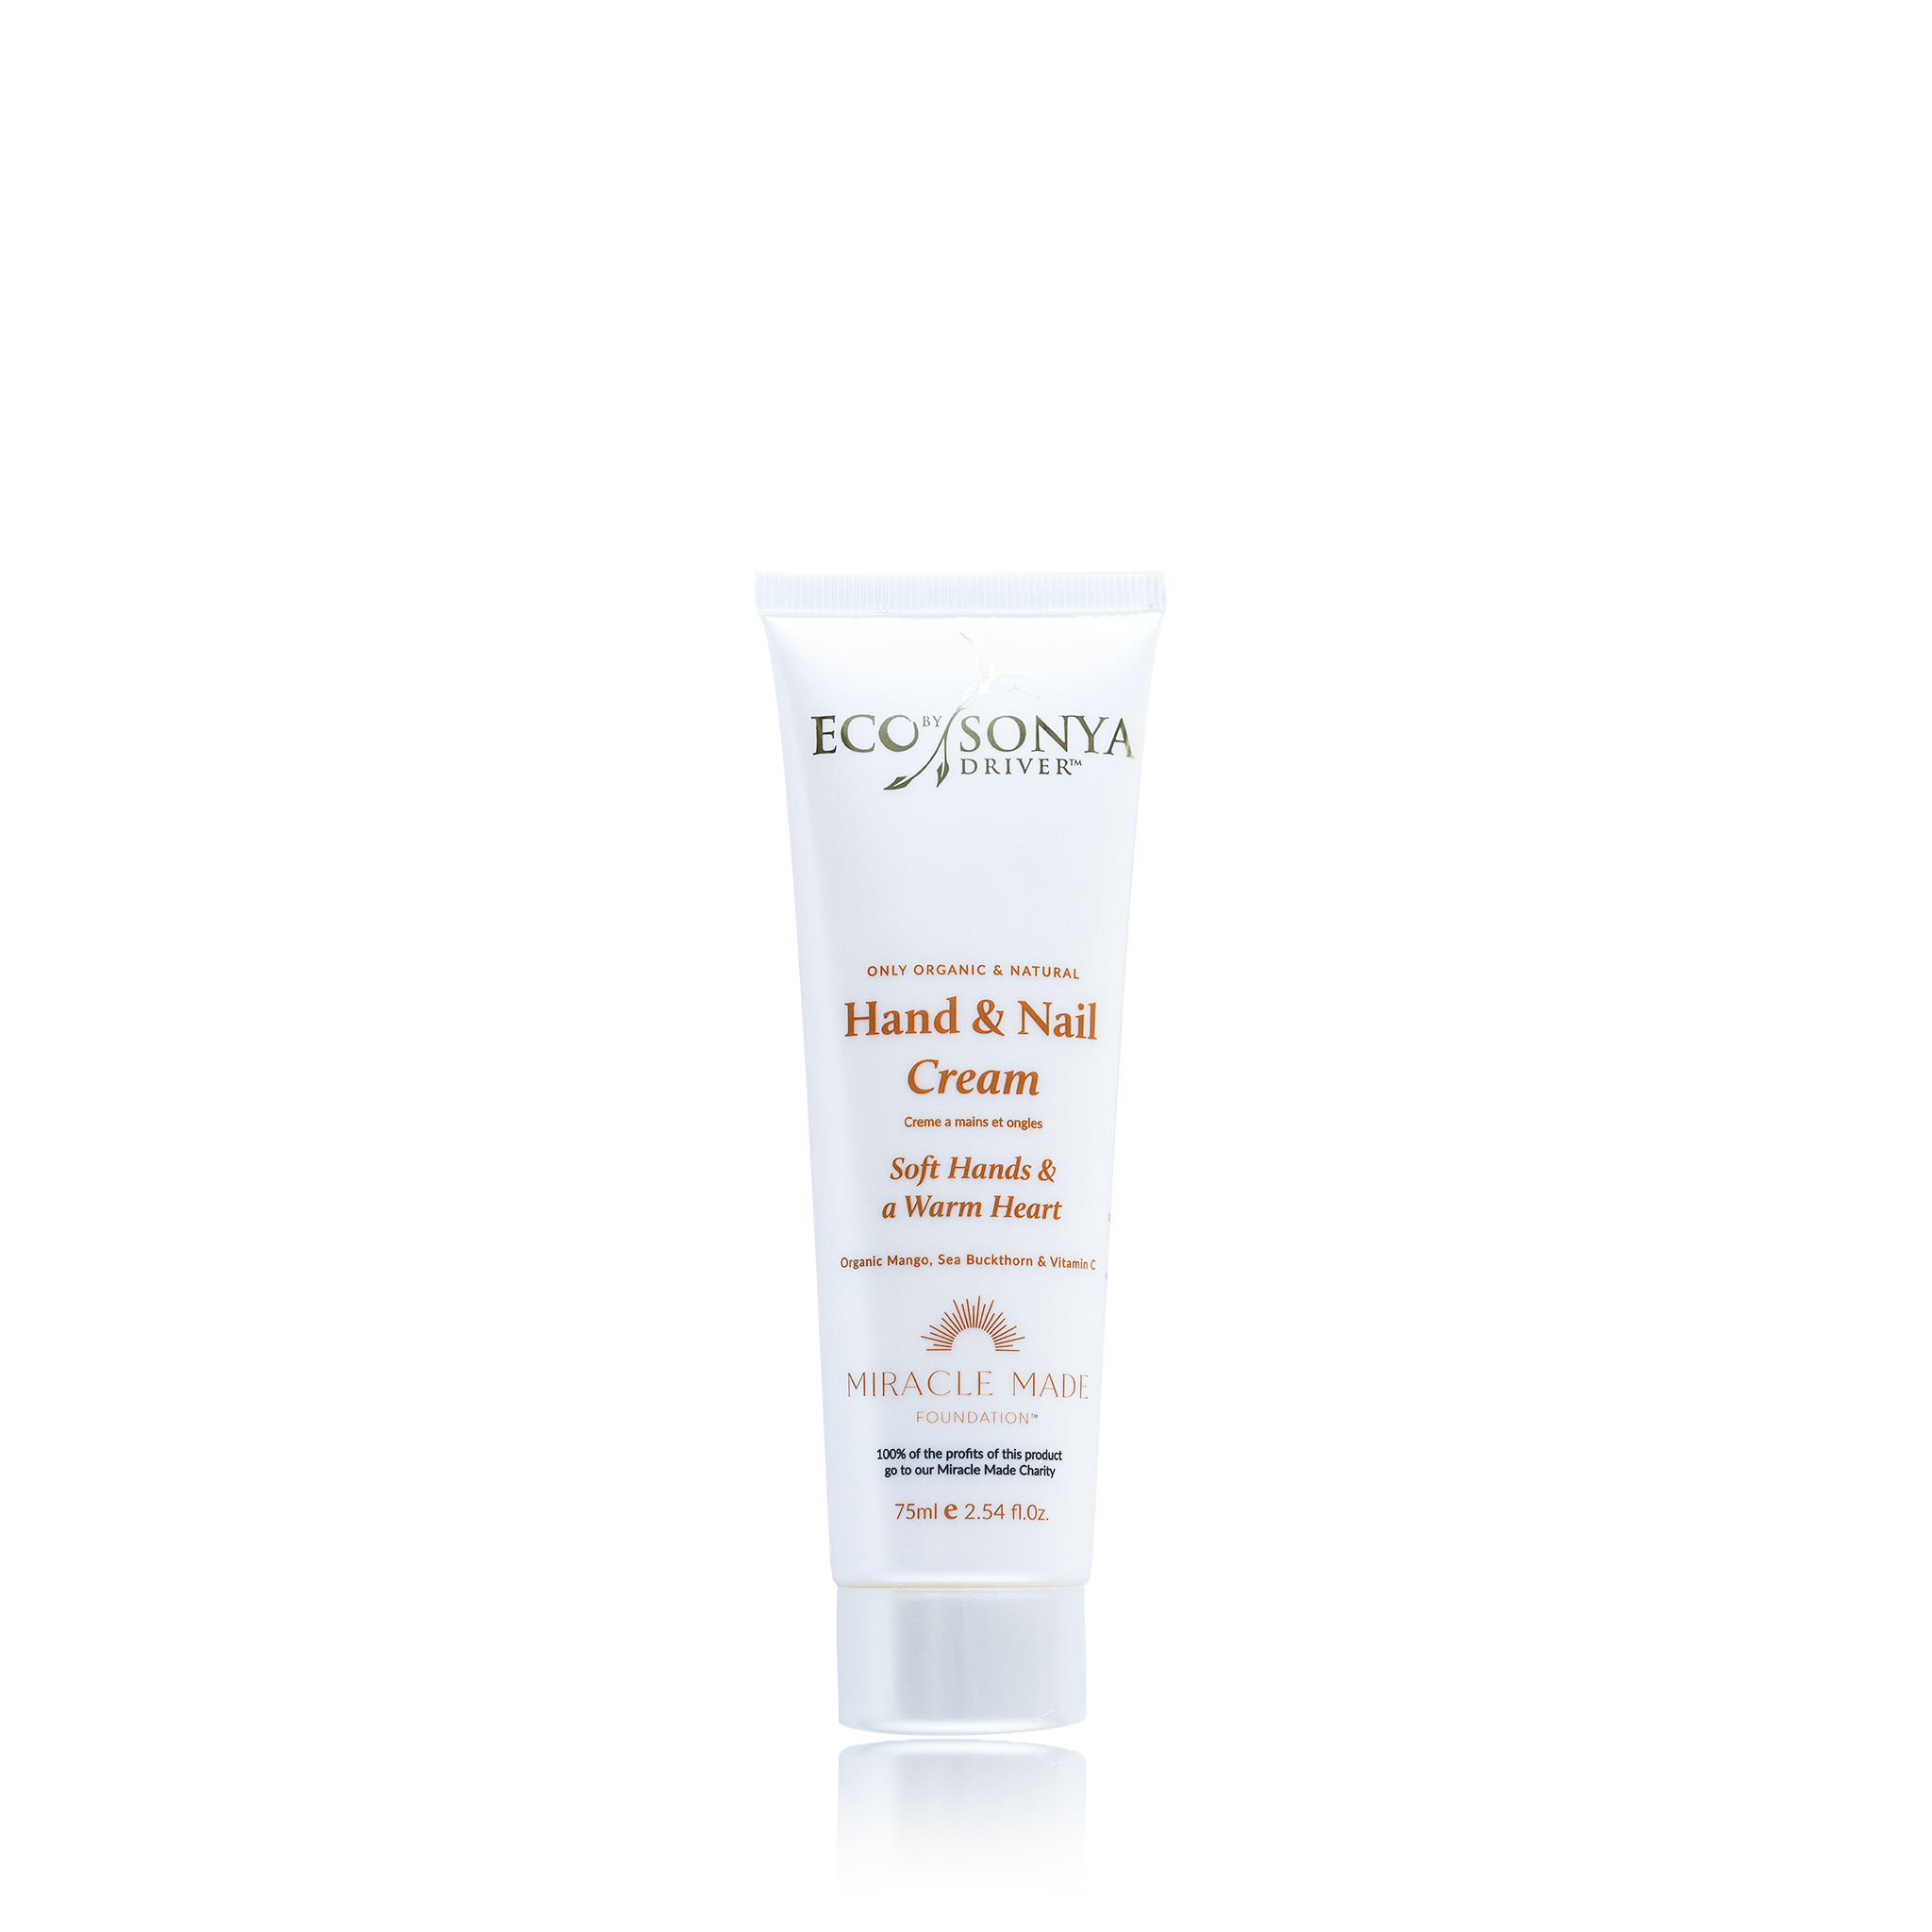 Hand & Nail Cream For Miracle Made Foundation